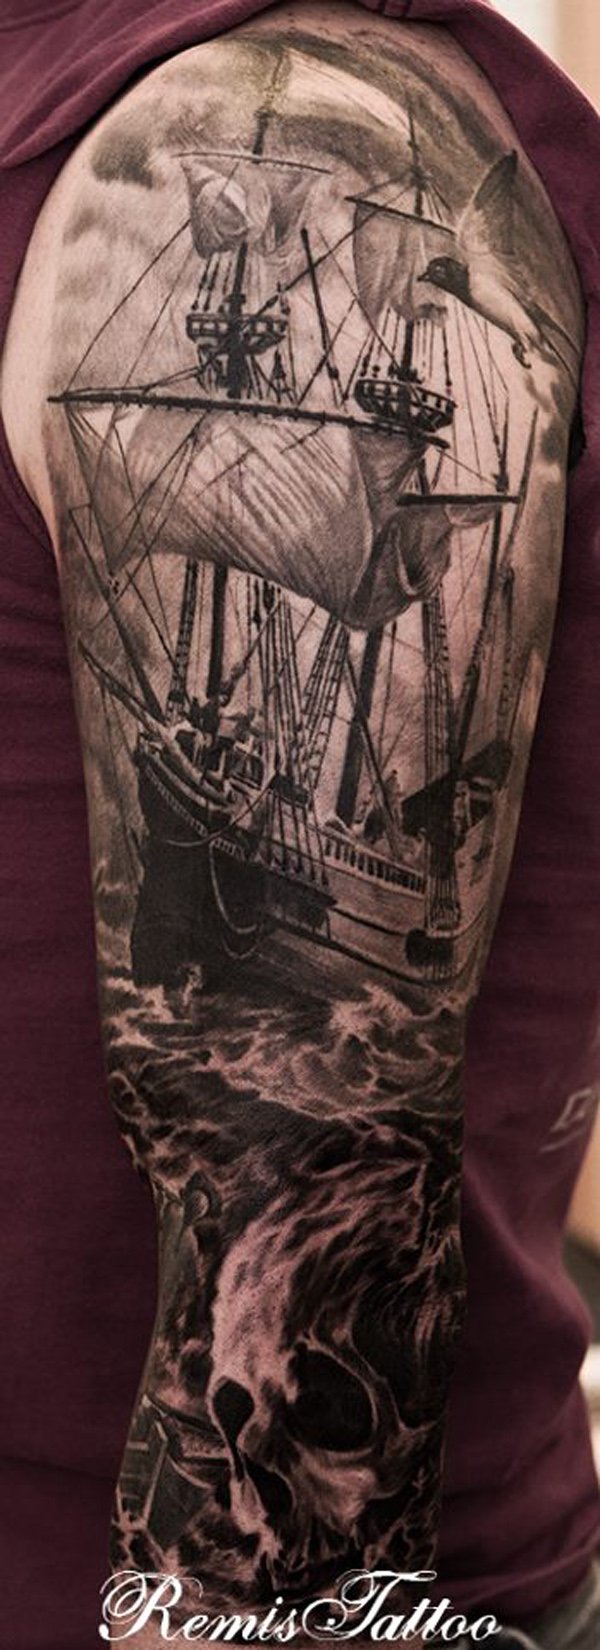 Attractive Black And Grey Ghost Pirate Ship Tattoo On Left Full Sleeve